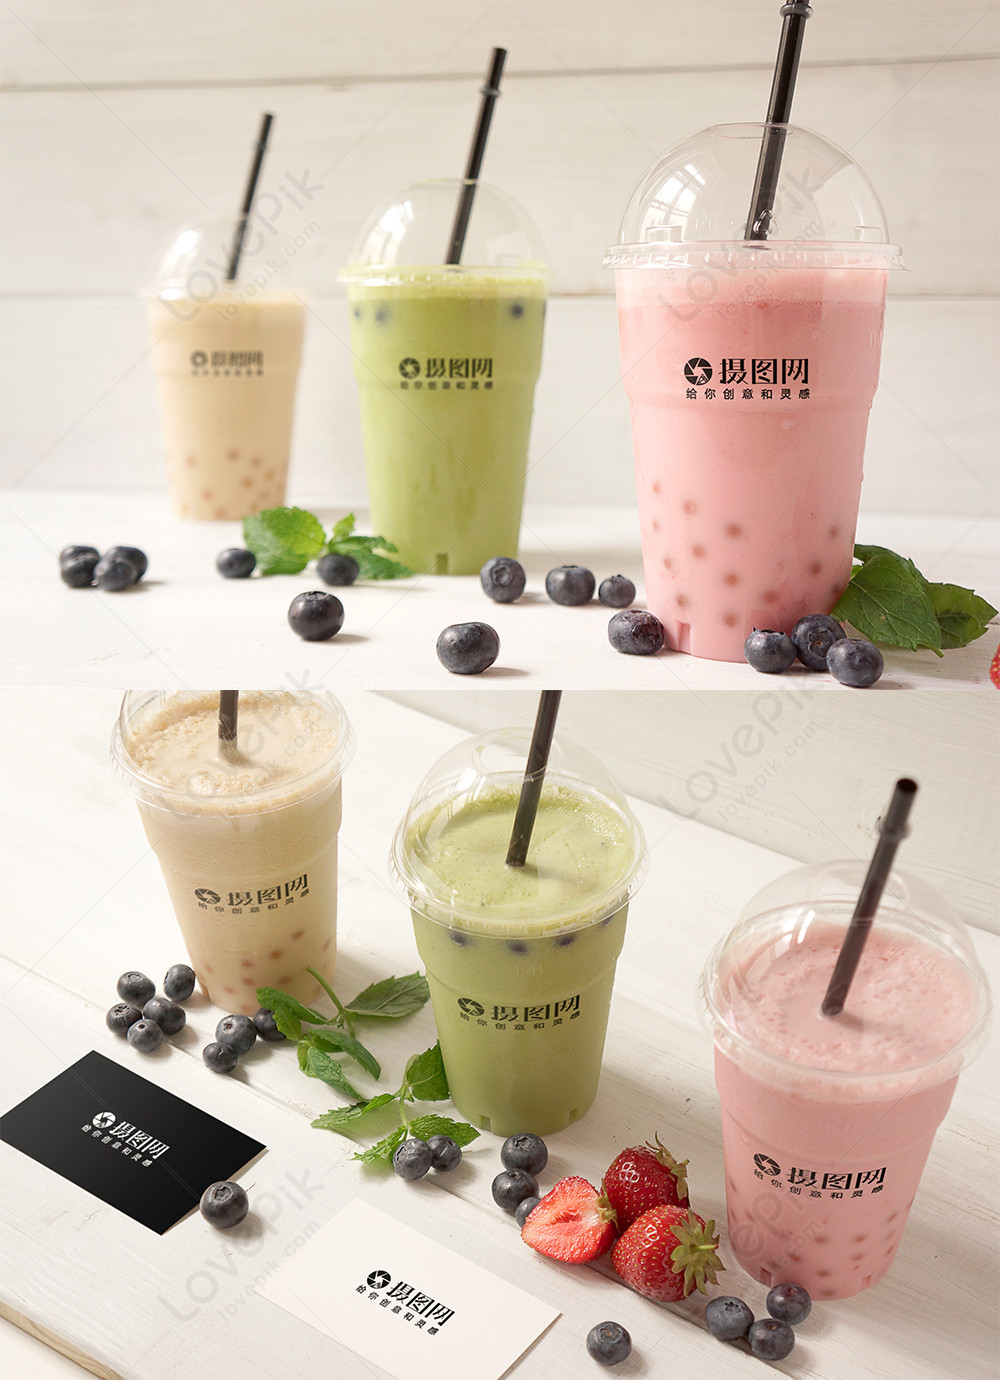 Download Bubble tea packaging mockup template image_picture free download 400783908_lovepik.com